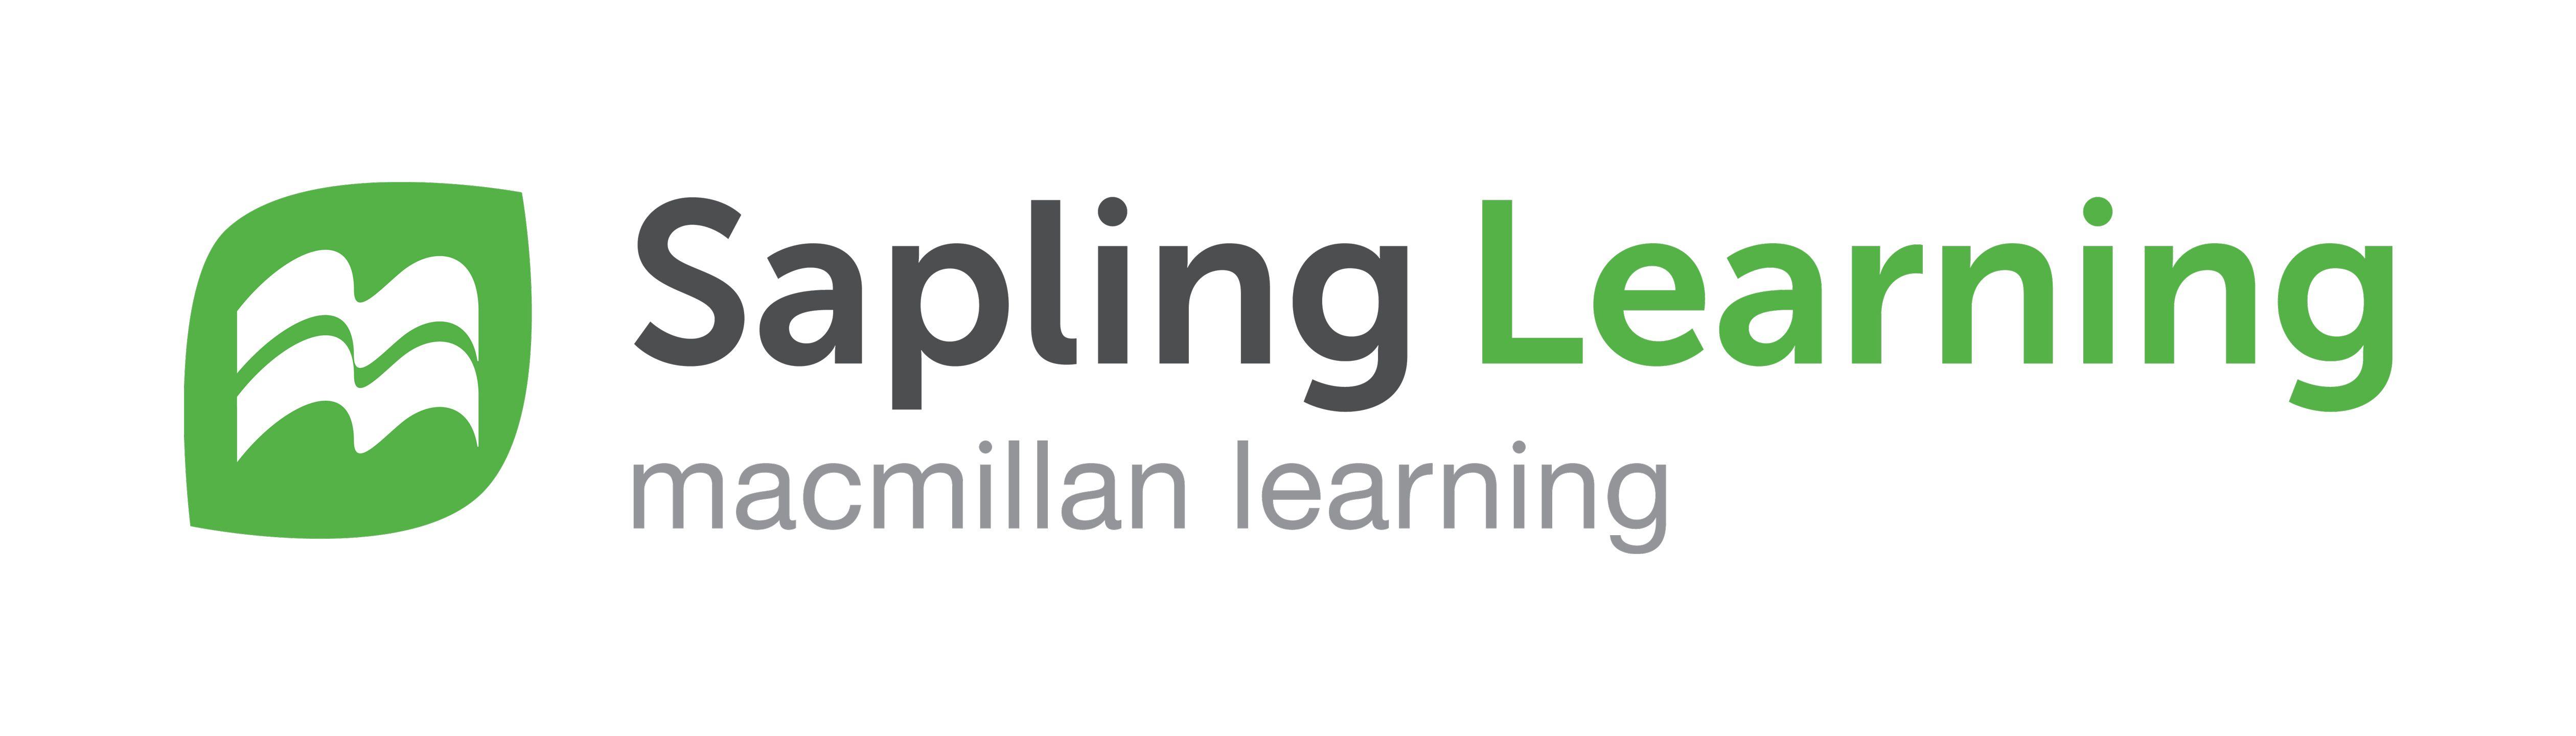 Calculus Logo - Sapling Learning Single Course Homework for Calculus Based Physics